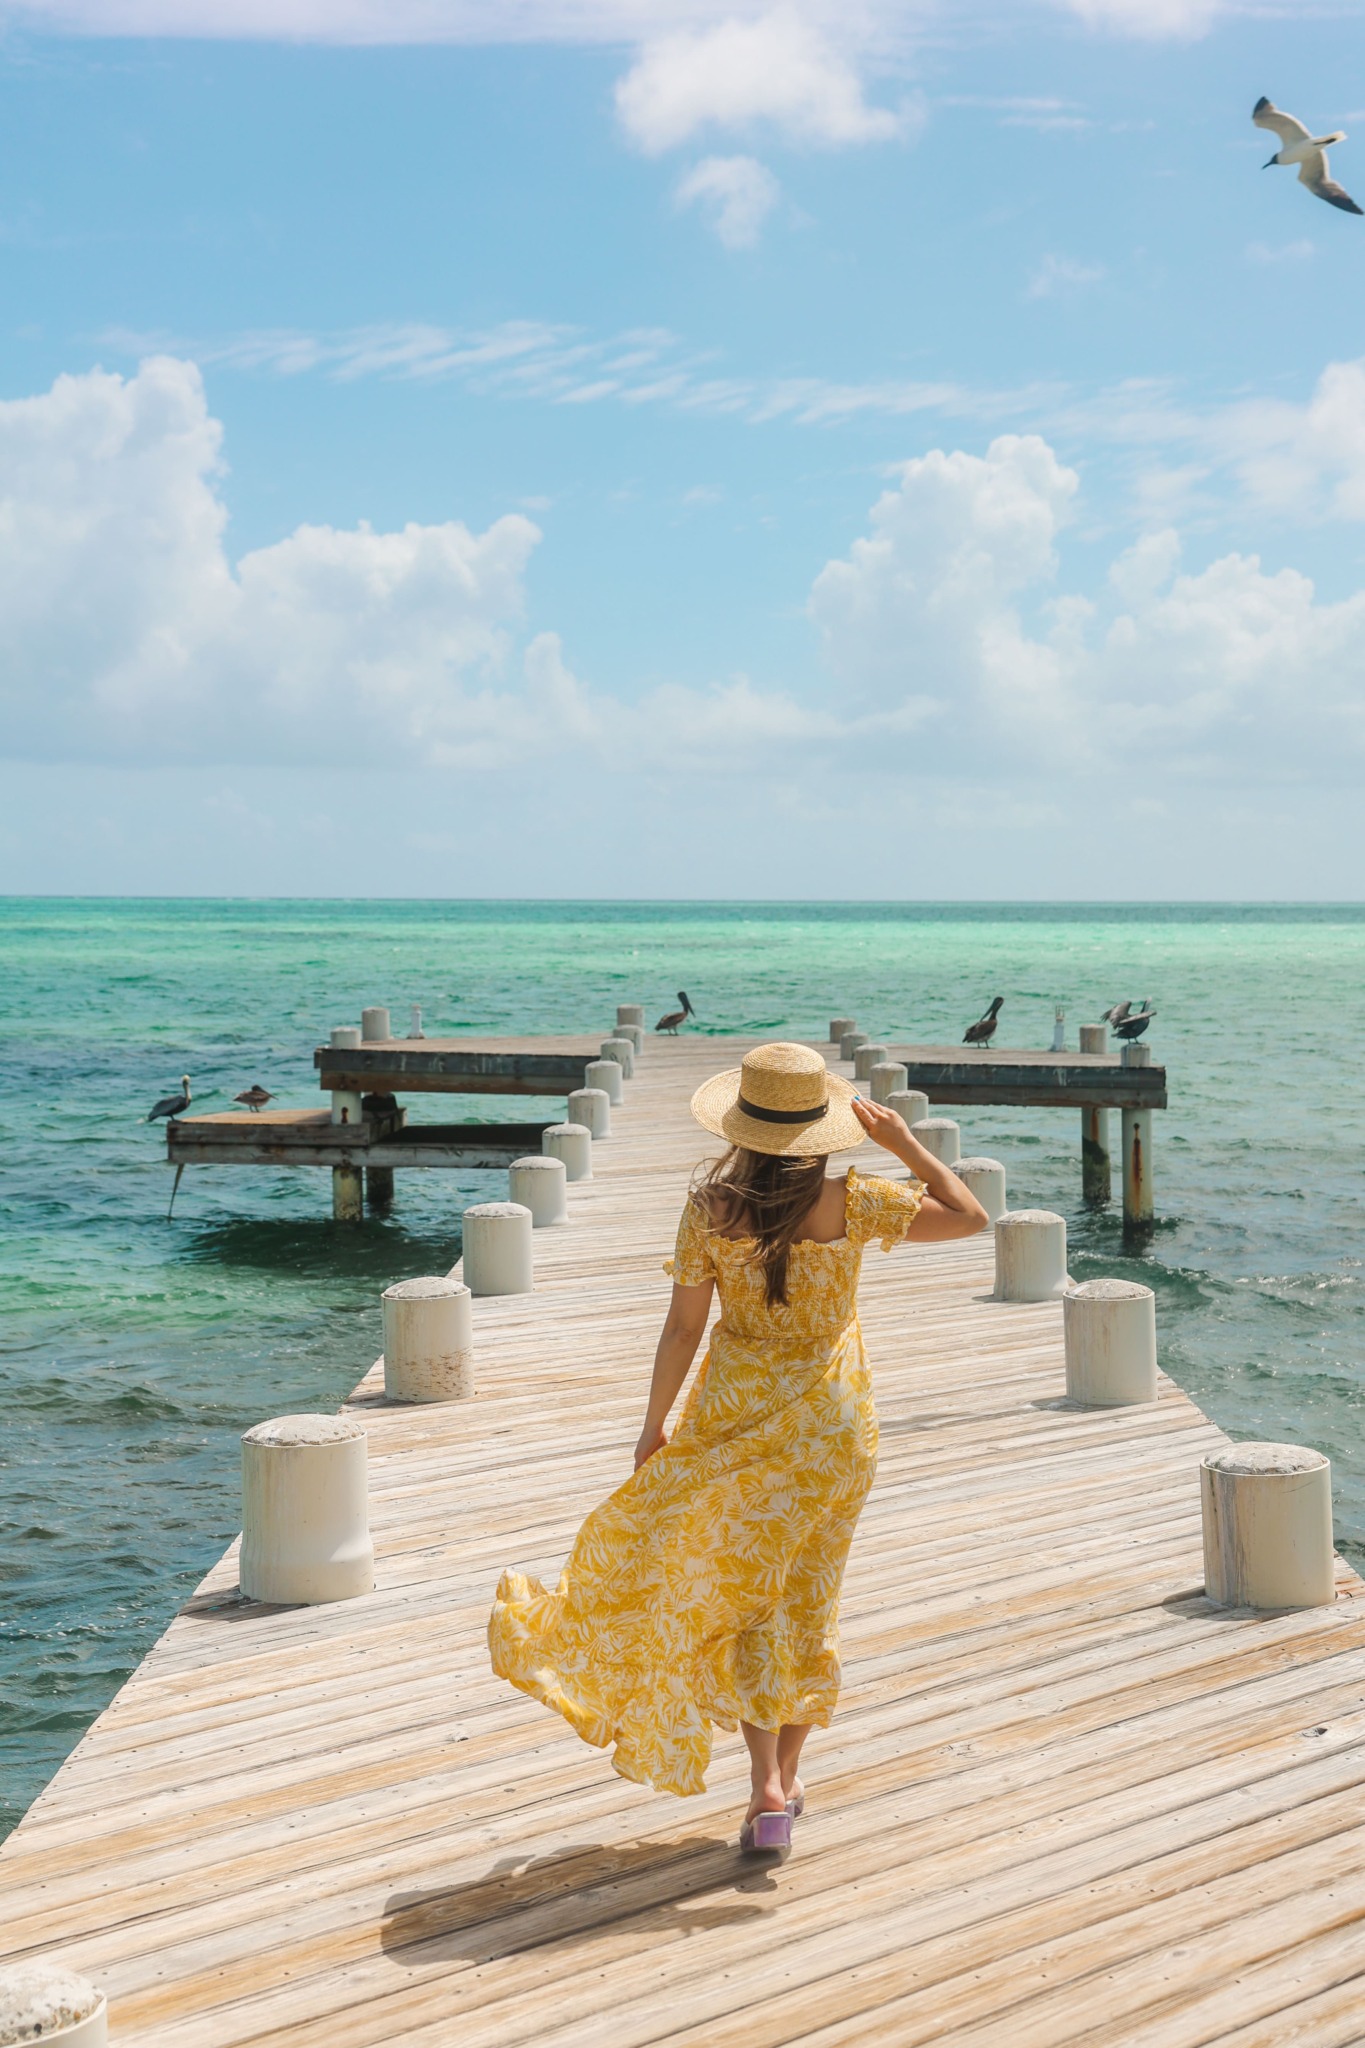 Blue Hills Jetty in Turks and Caicos. Photography by Jaz Wanderlust.